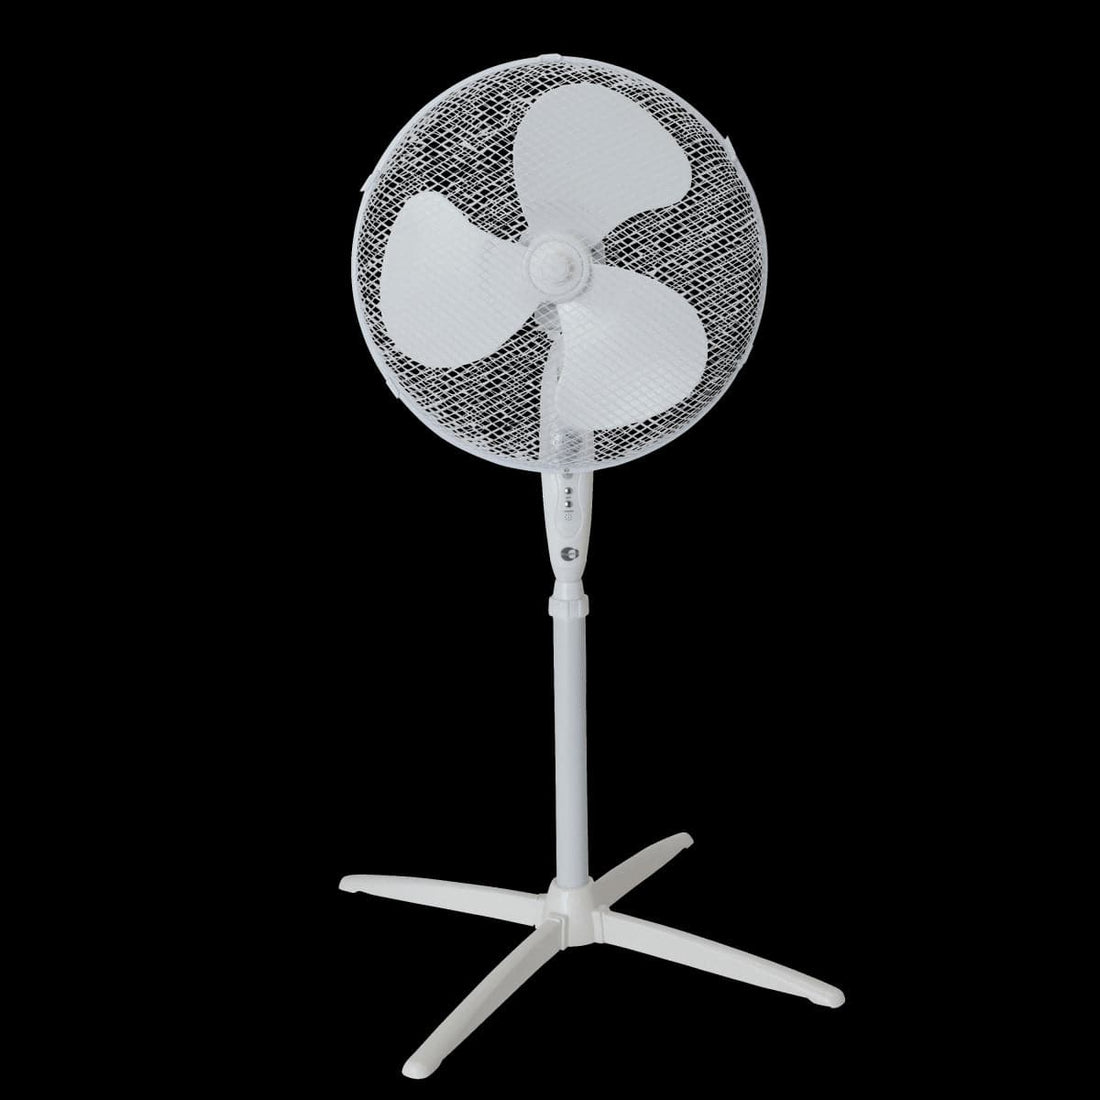 FLOOR STANDING FAN 40CM 45W WHITE WITH REMOTE CONTROL EQUATION - best price from Maltashopper.com BR420960342